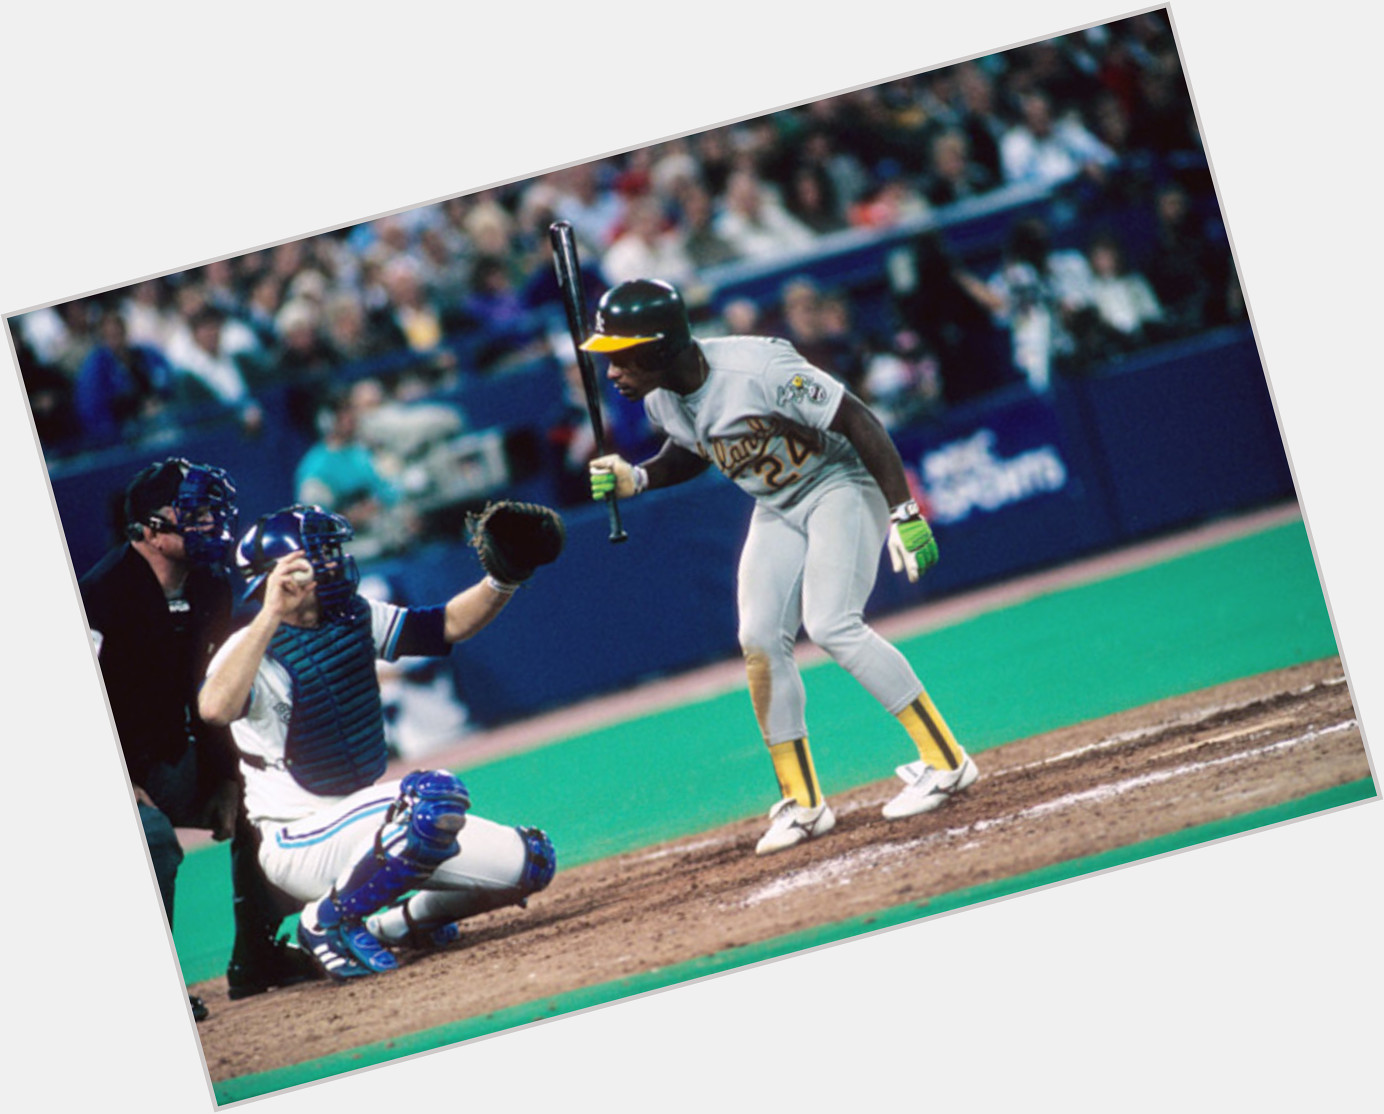 <a href="/hot-men/rickey-henderson/is-he-married-hall-fame-still-playing-baseball">Rickey Henderson</a>  